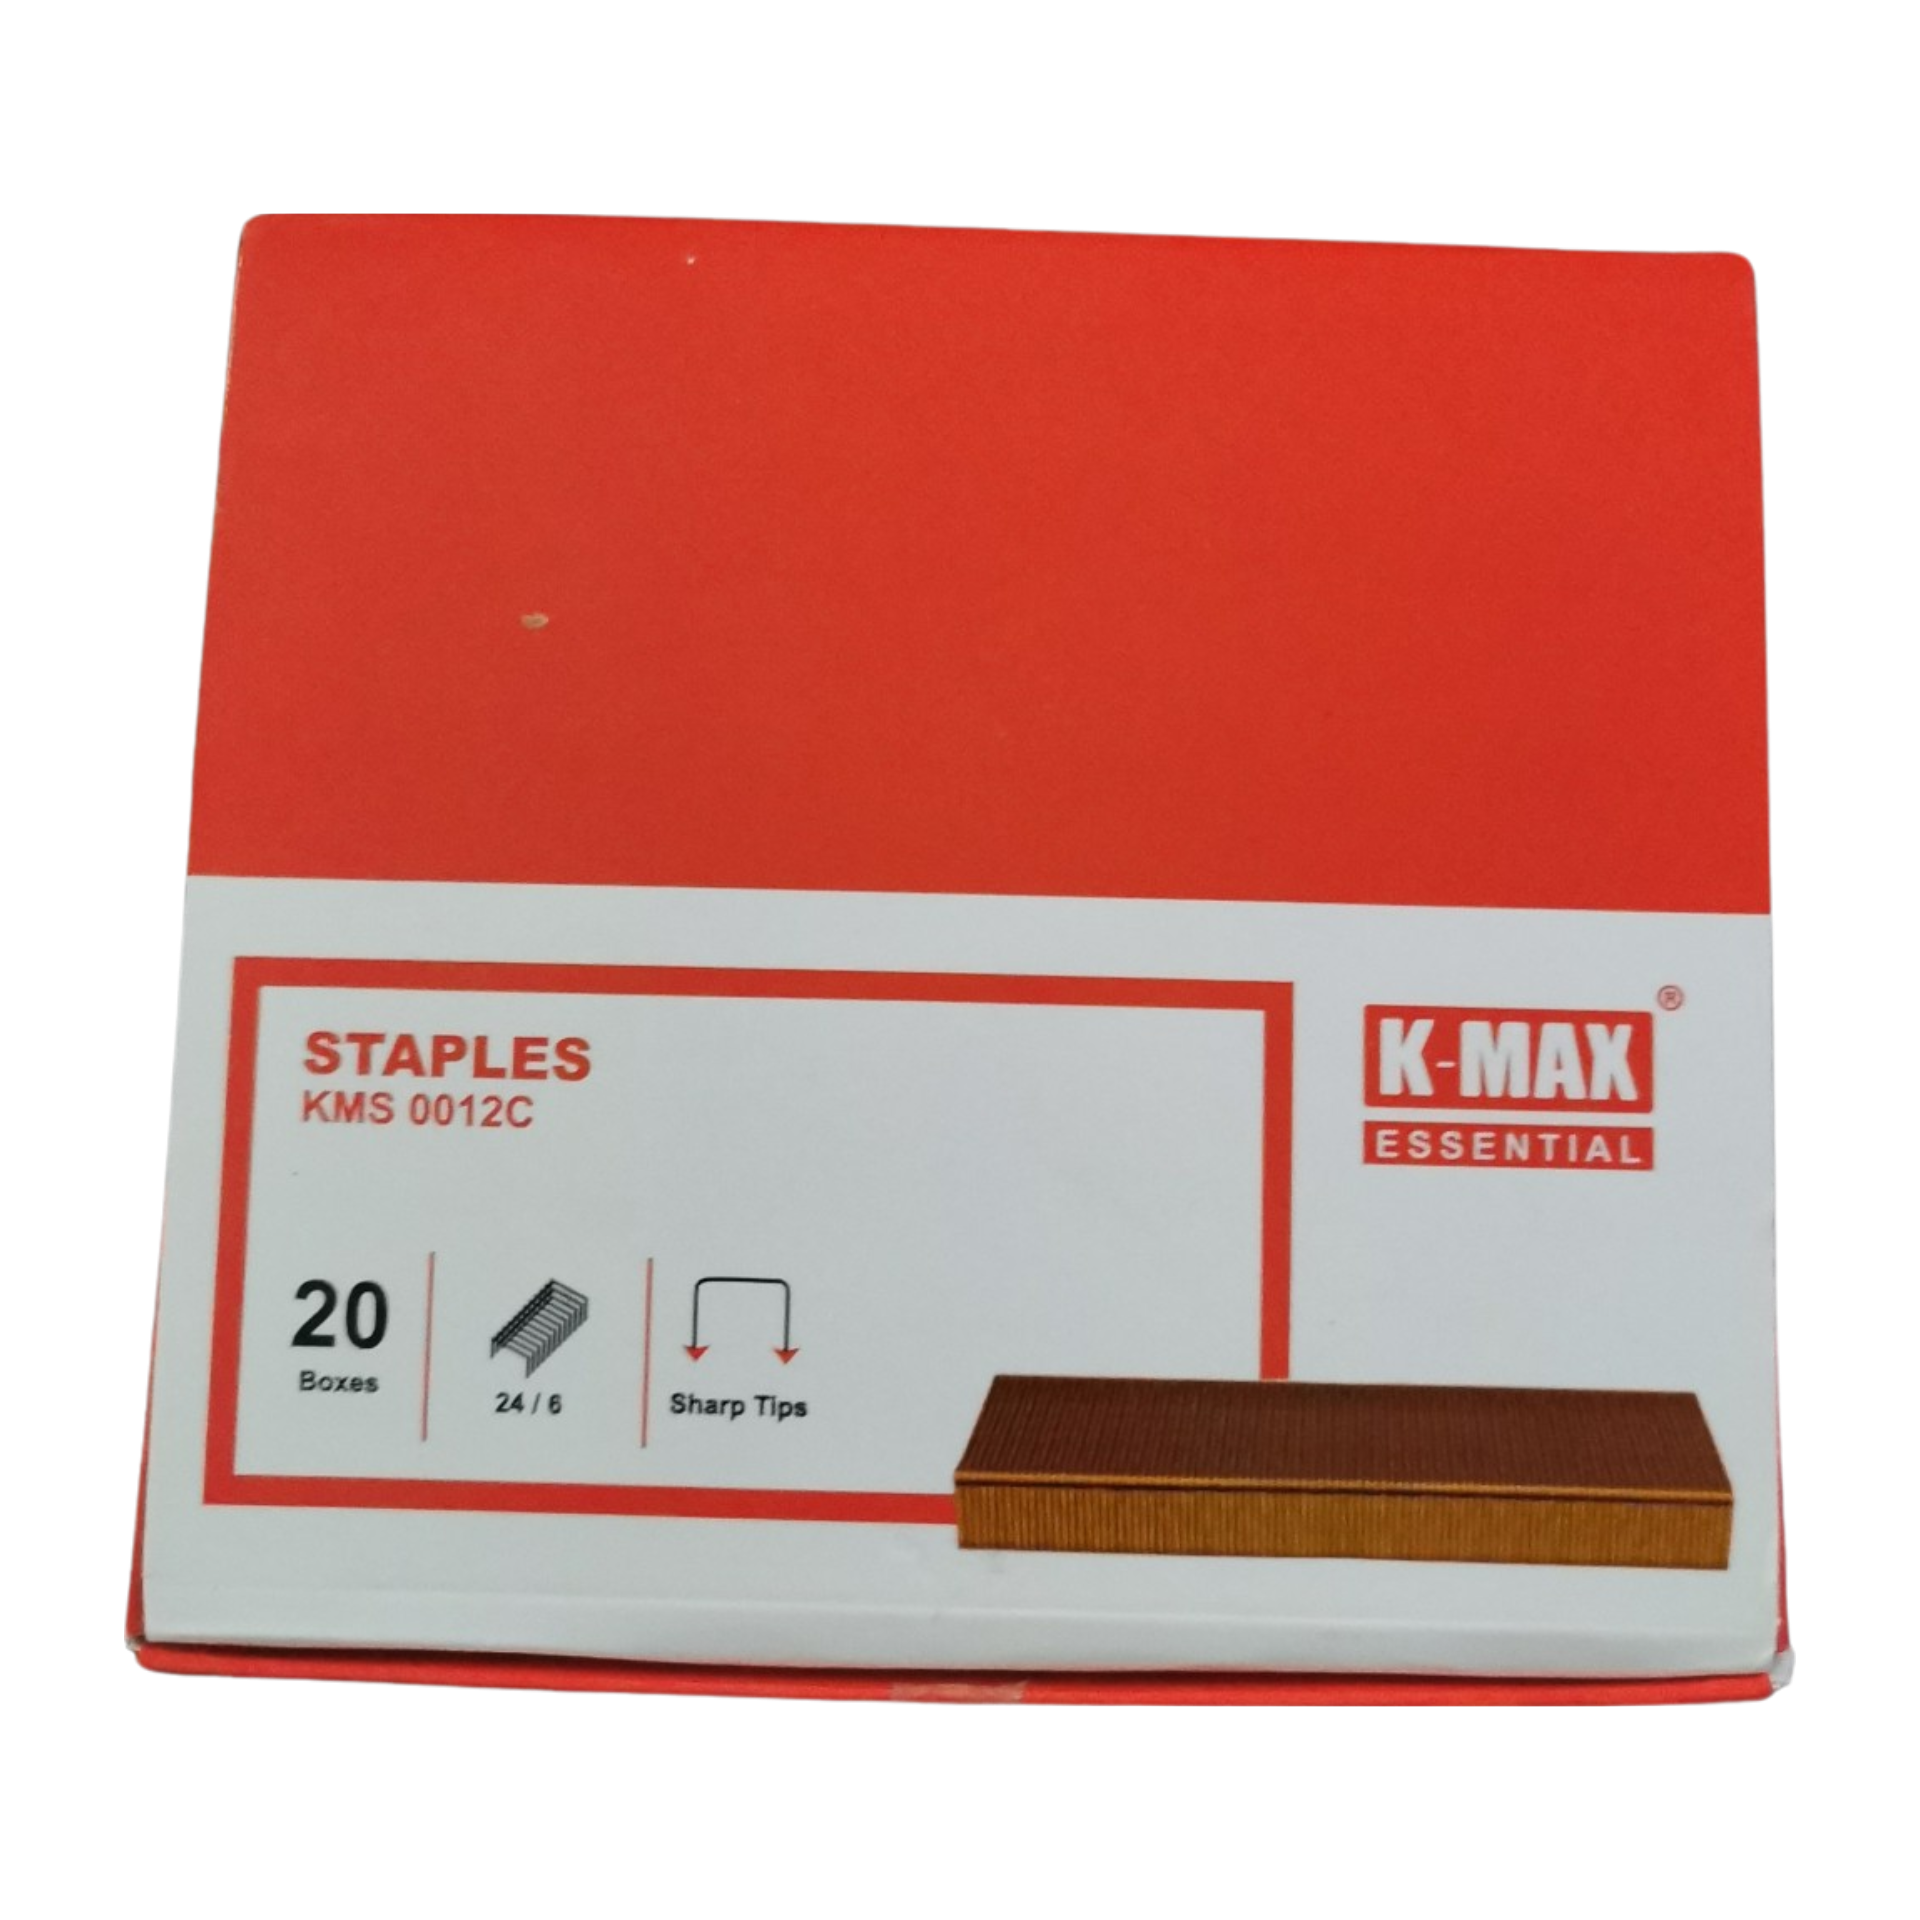 K-MAX Staples , KMS 0012C (PACK OF 20 BOXES)